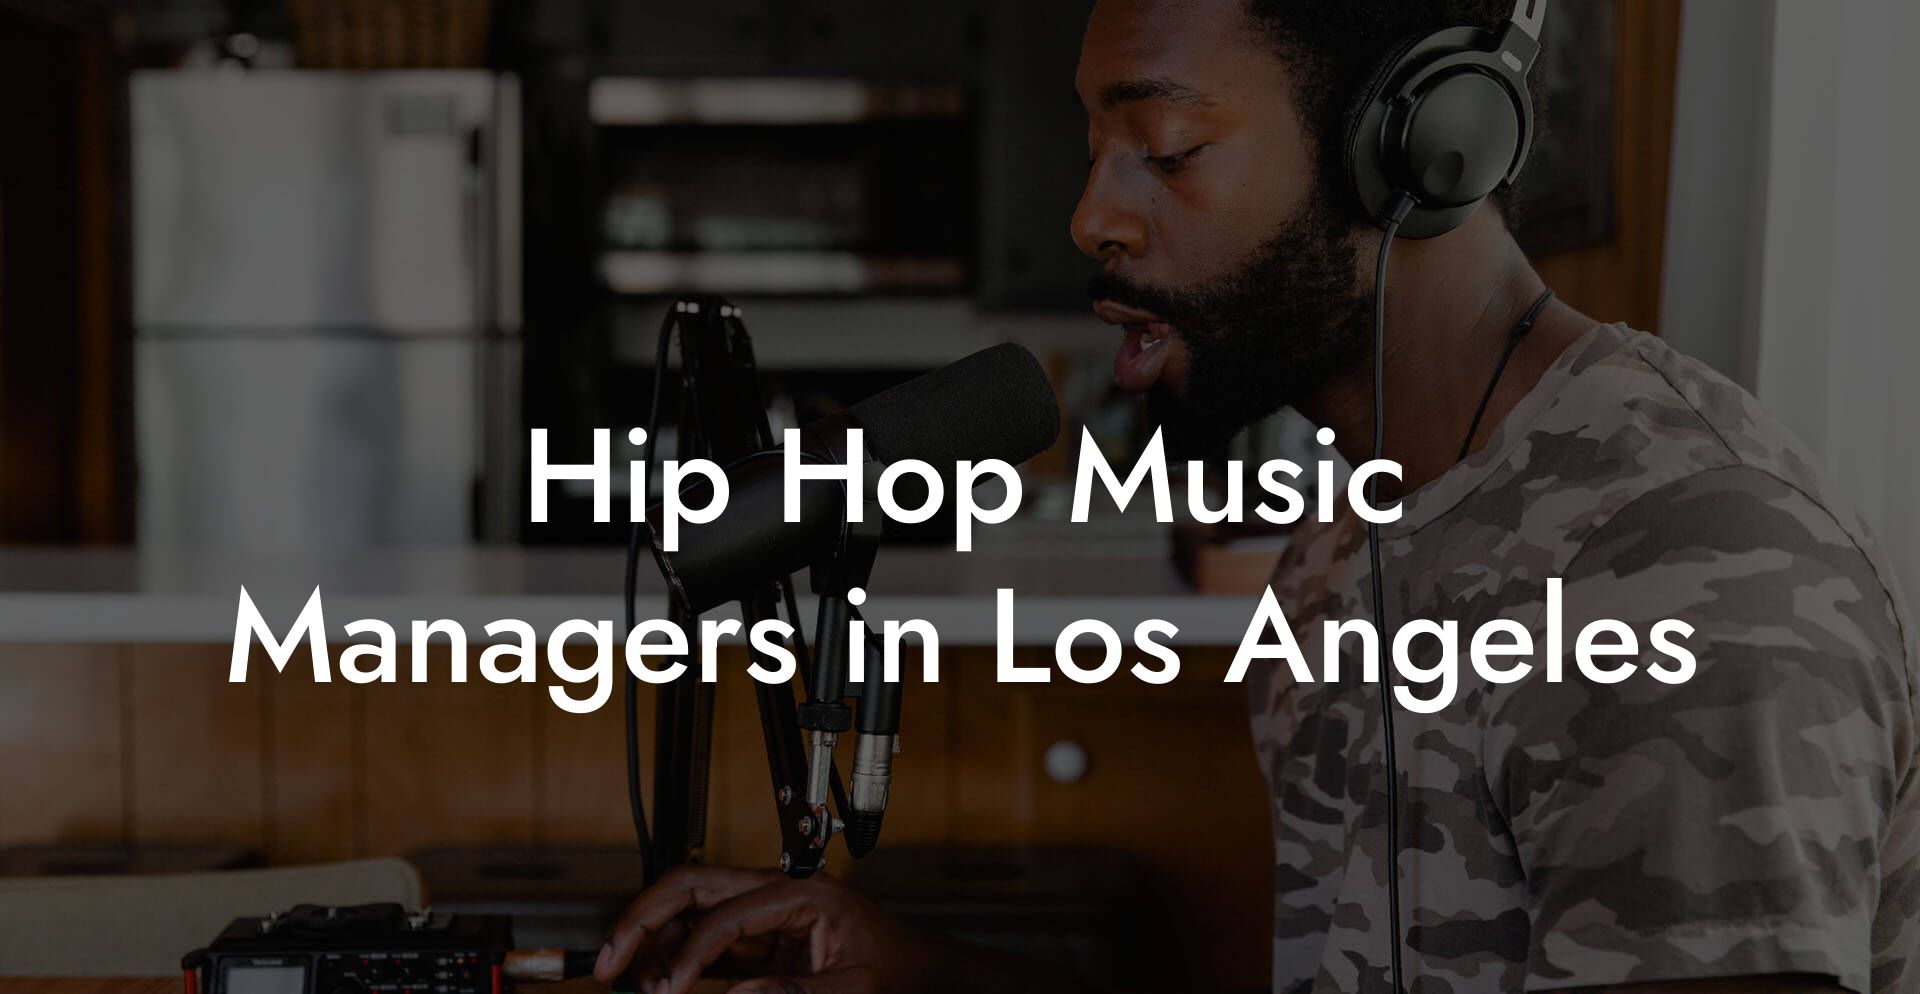 Hip Hop Music Managers in Los Angeles